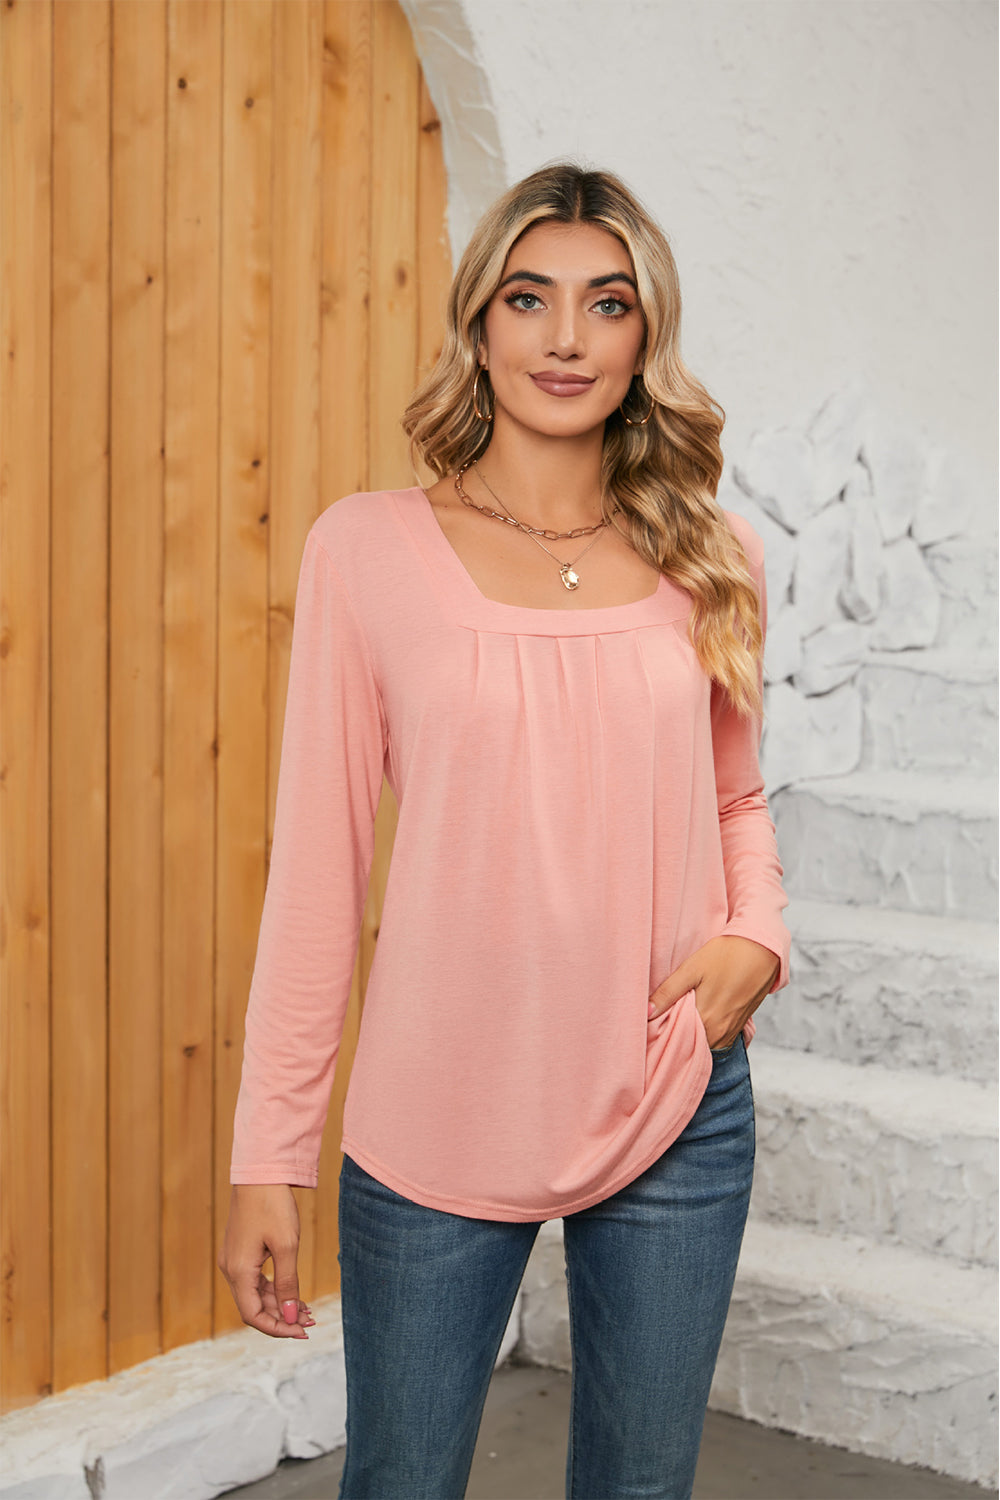 Jerry's Apparel Women's Long Sleeve T-shirts Blush Pink / S Square Neck Long Sleeve T-Shirt